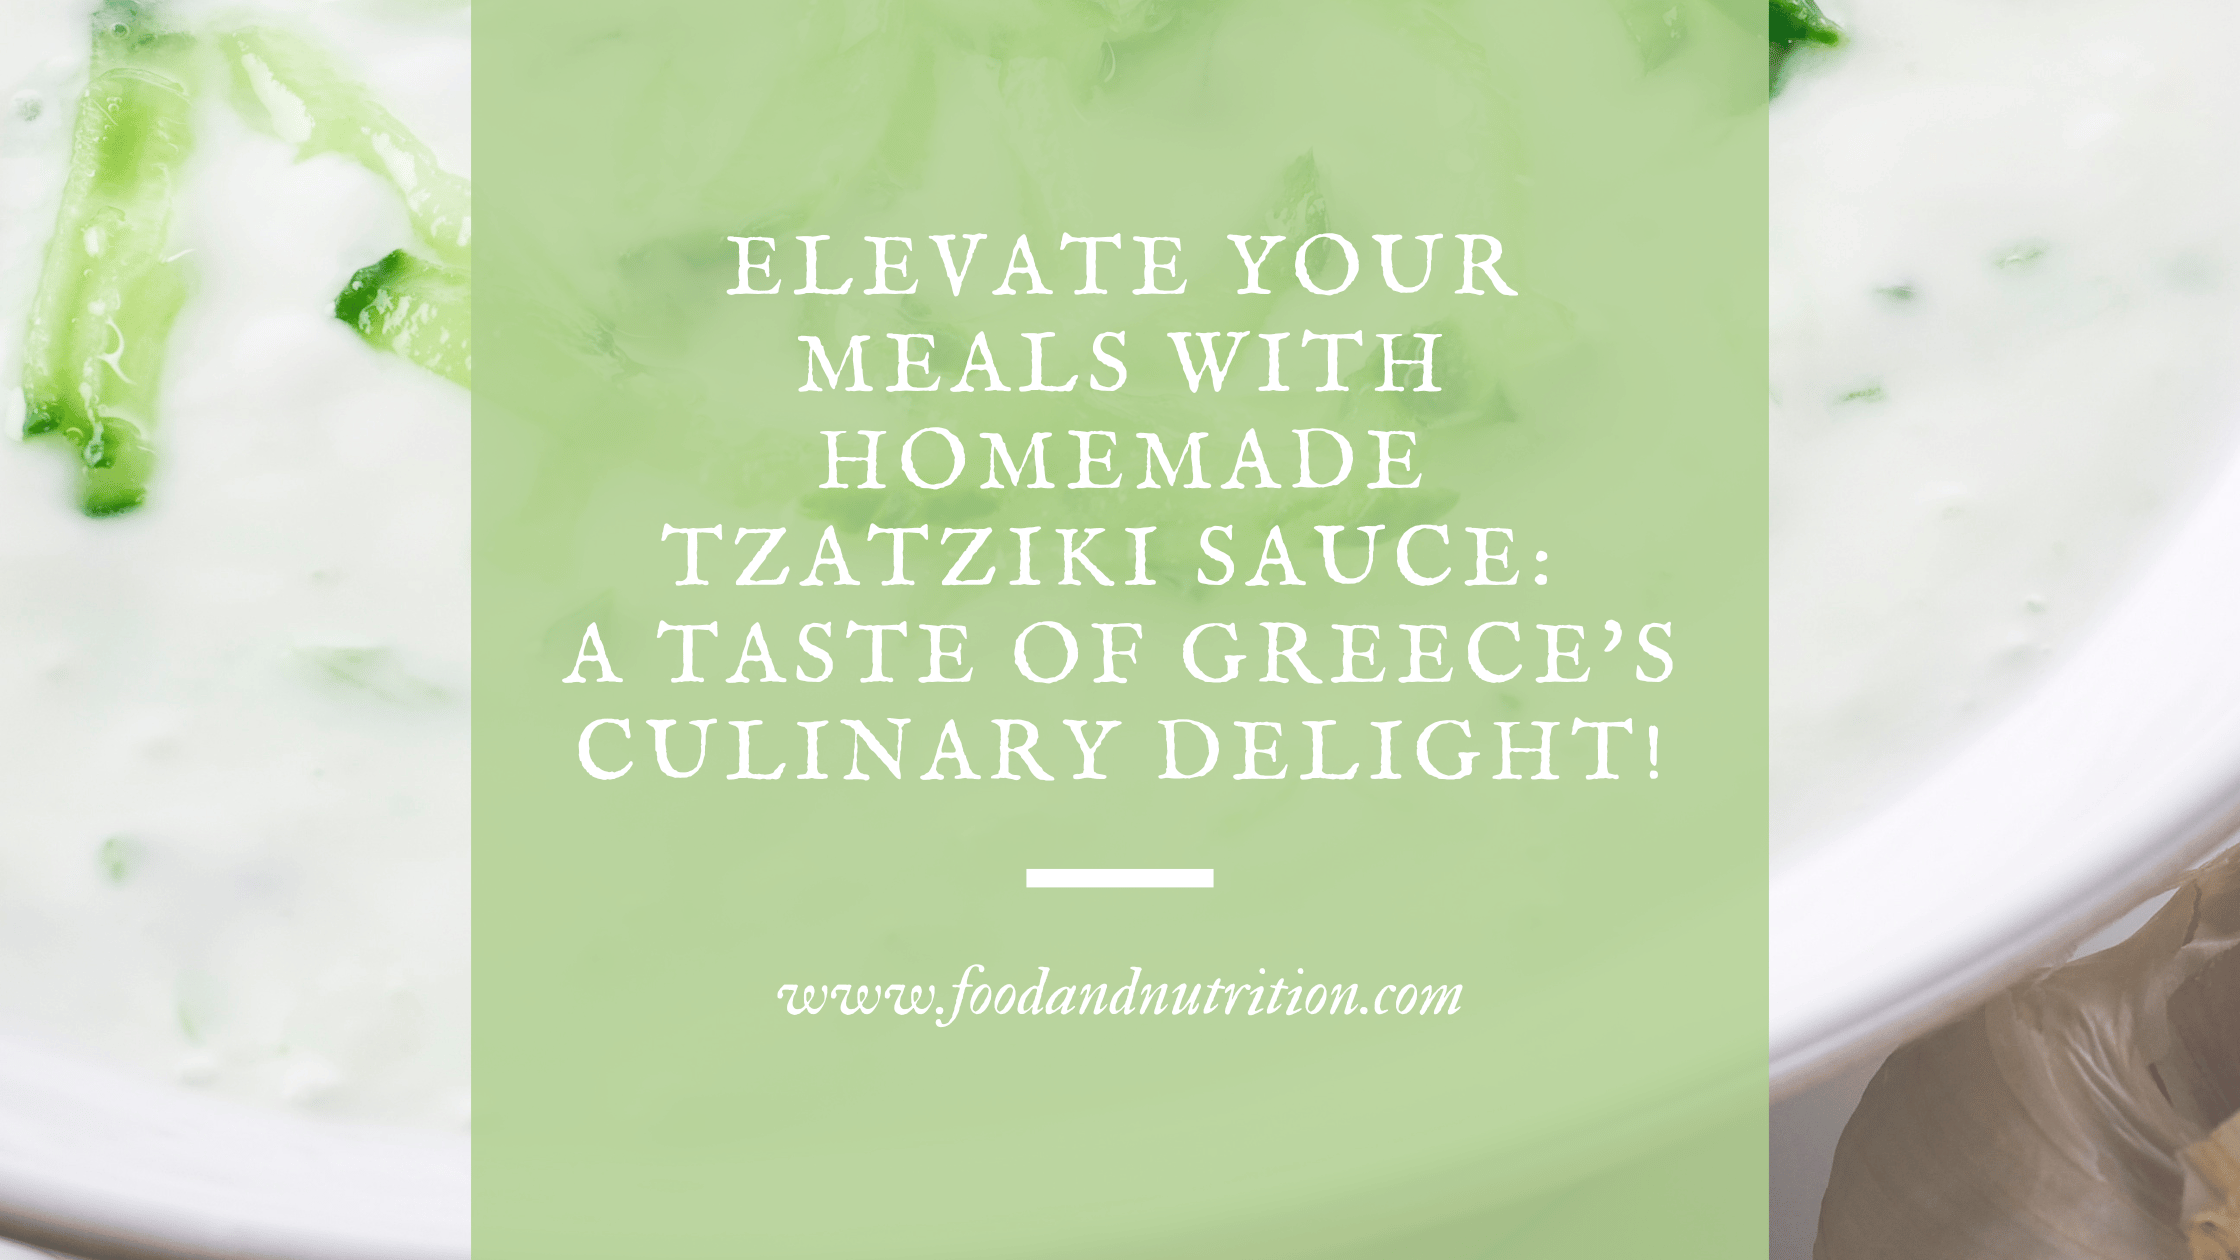 Elevate Your Meals with Homemade Tzatziki Sauce: A Taste of Greece’s Culinary Delight!